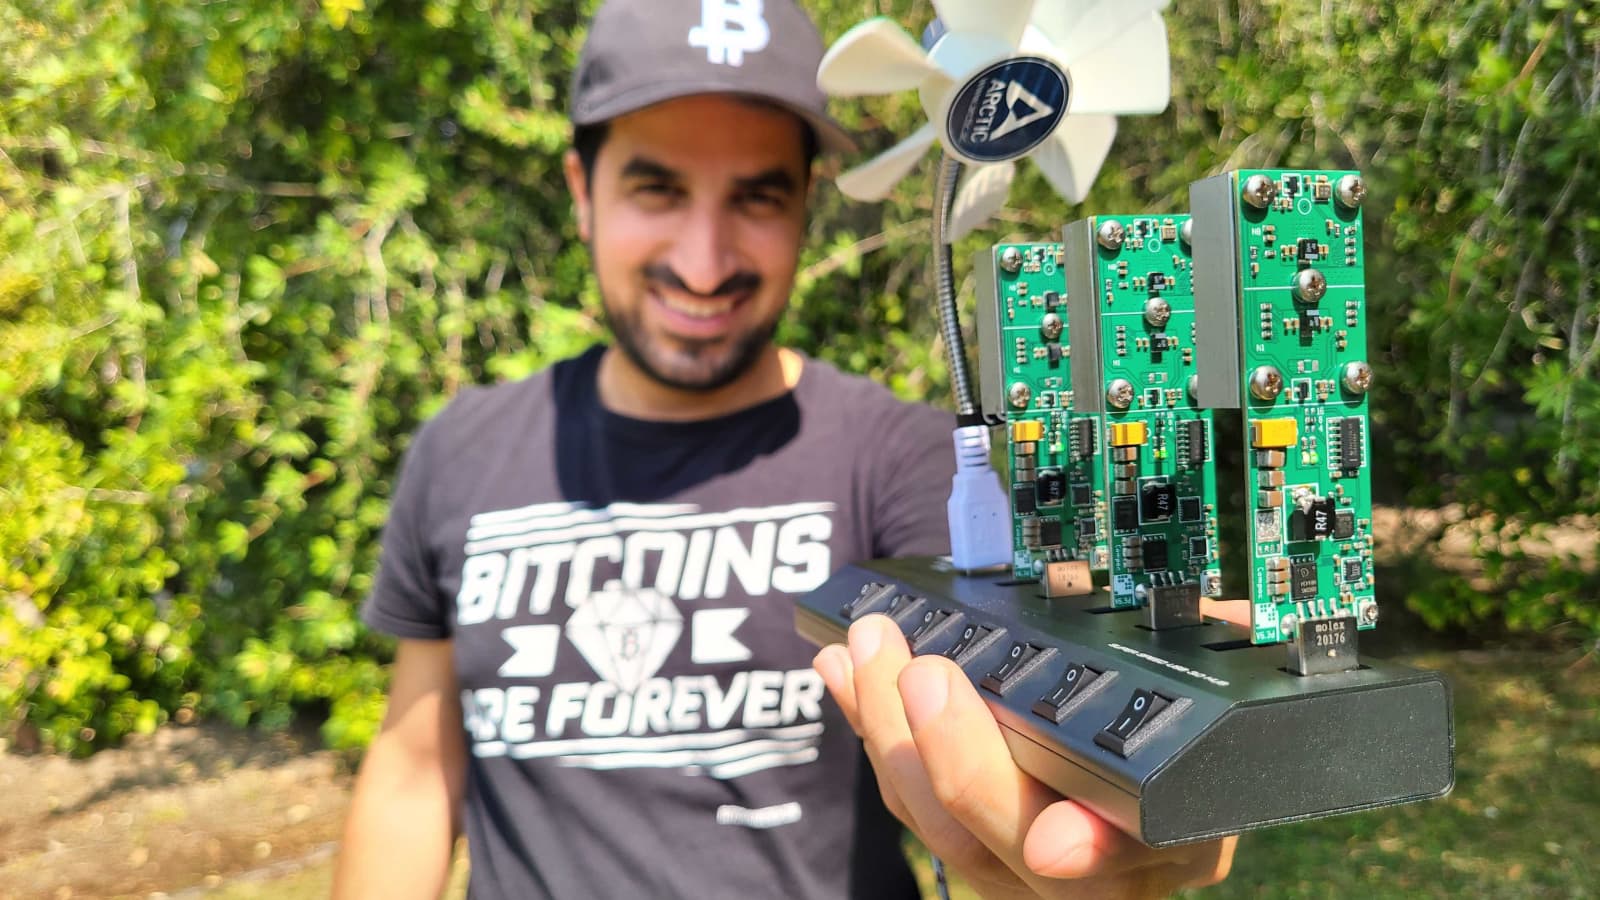 bitcoin mini mining rig costs 875 lets owner mine from starbucks